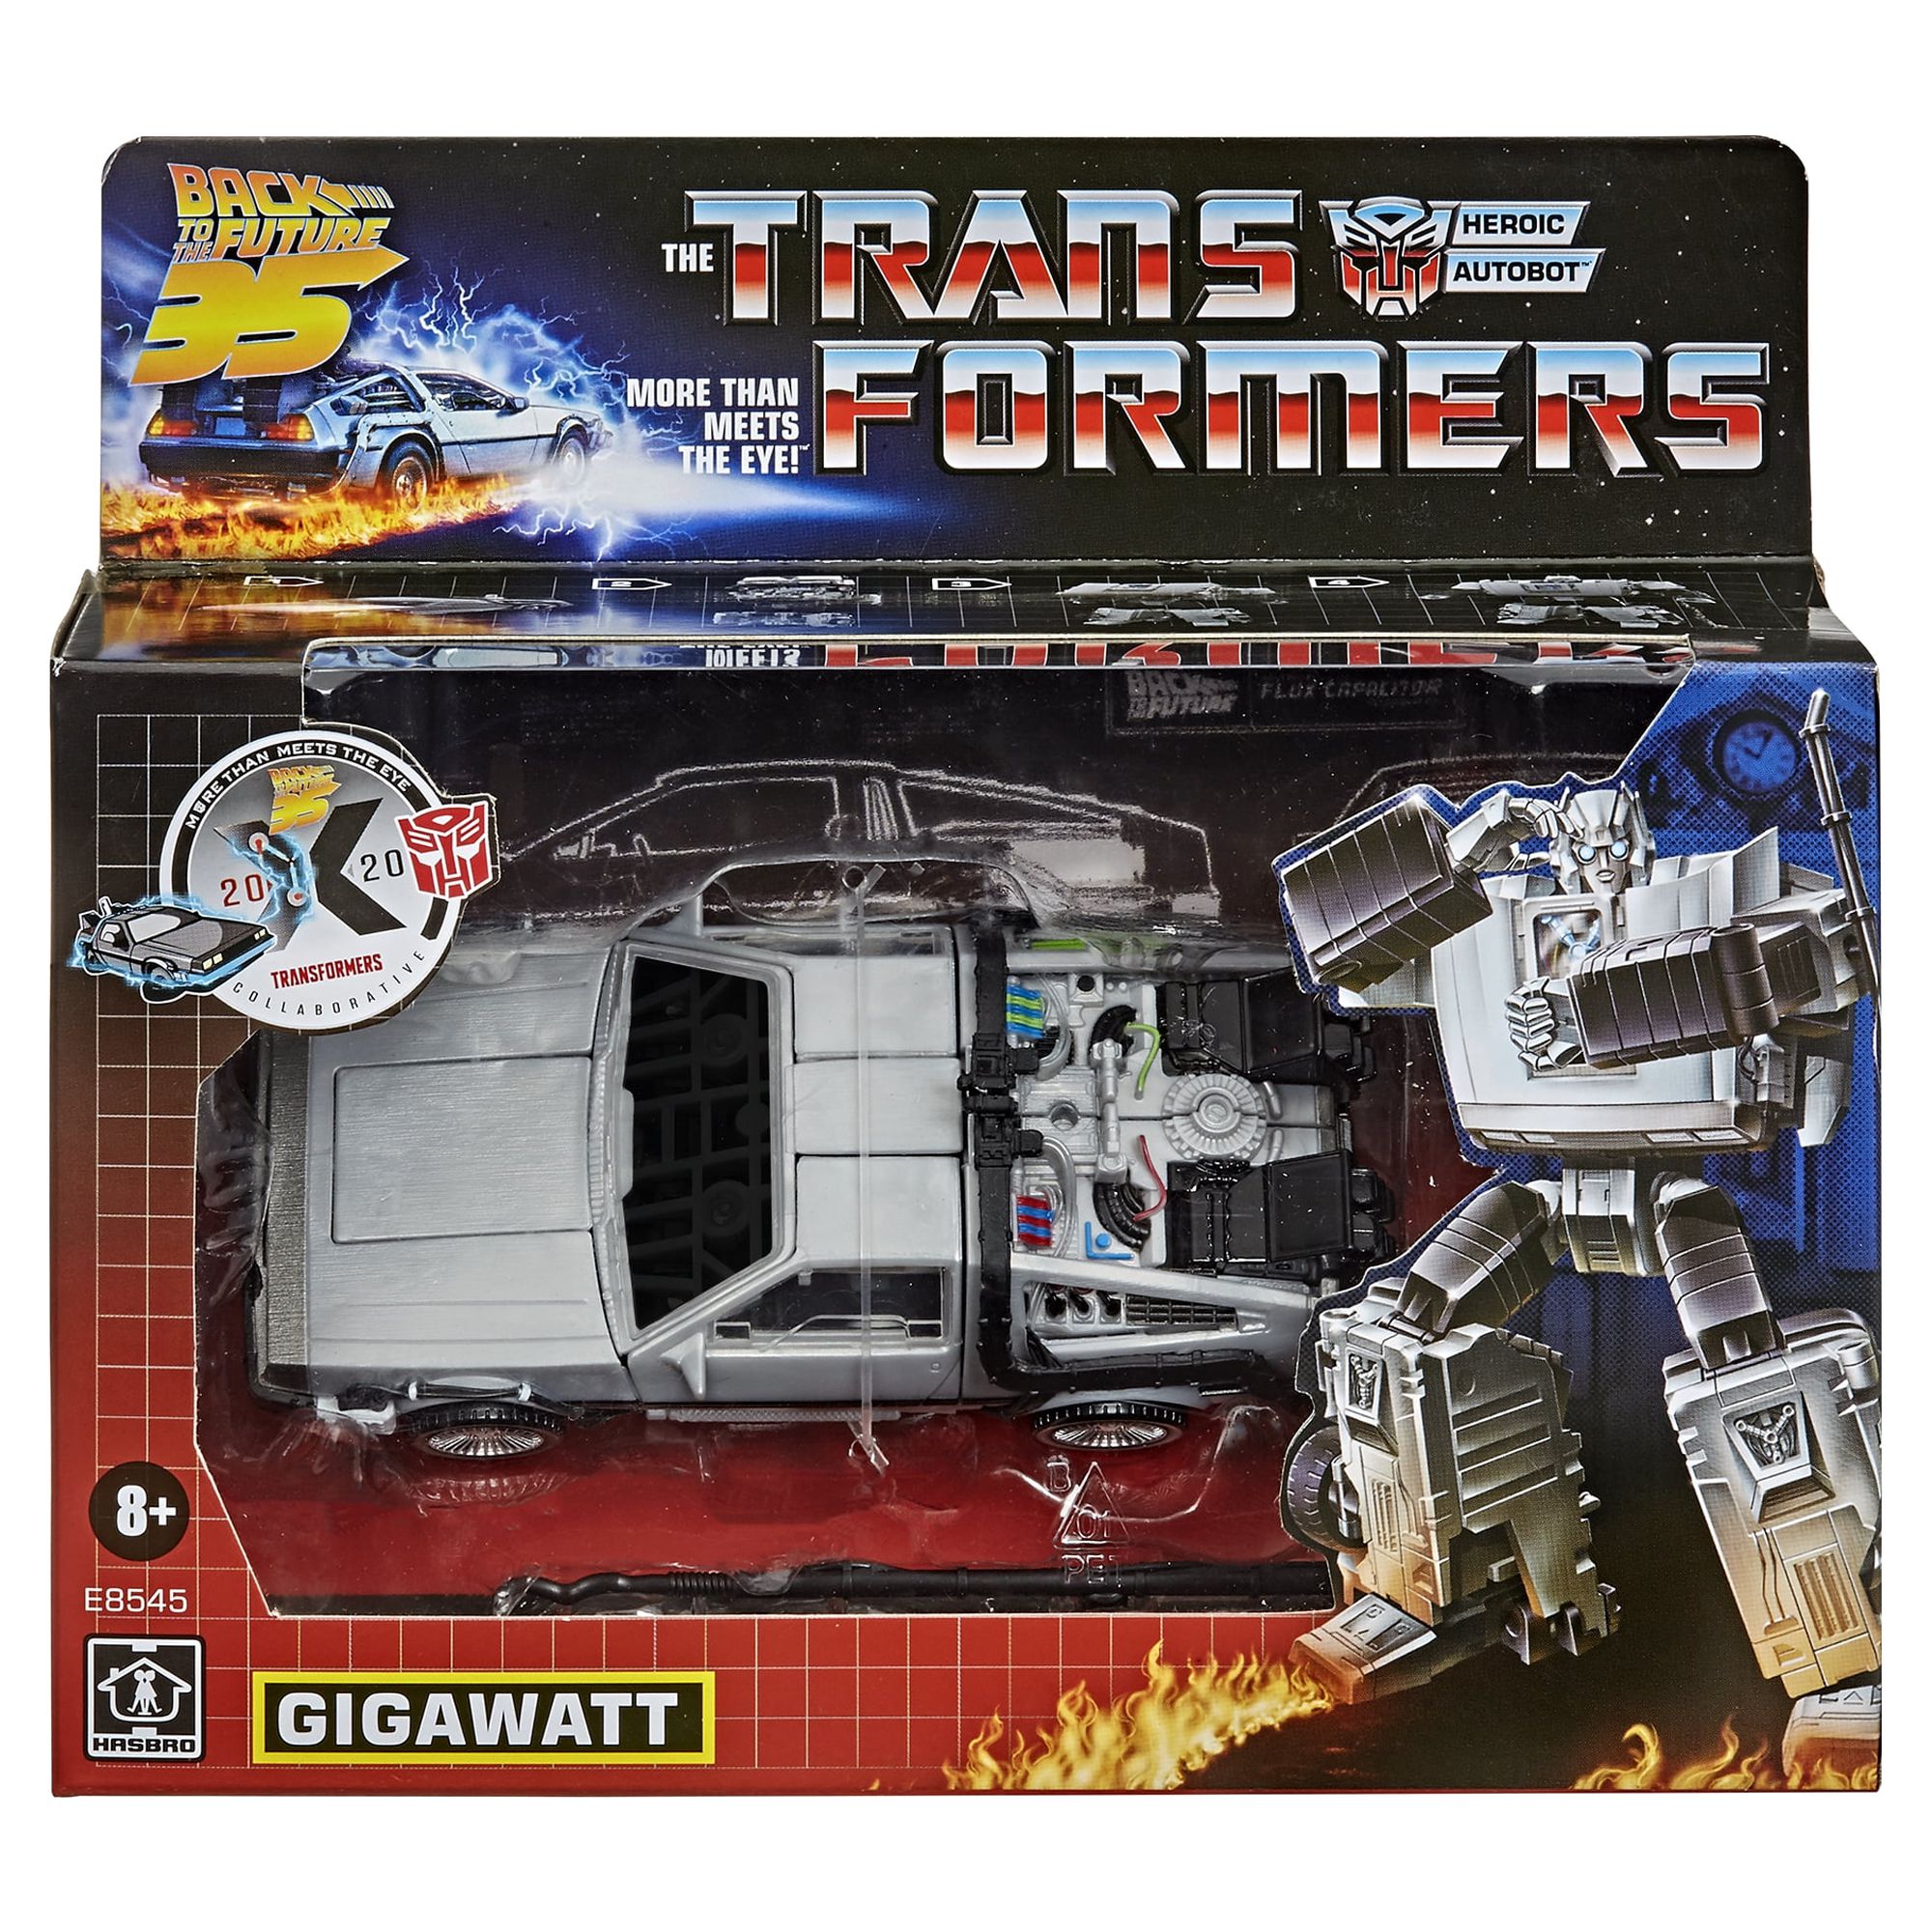 Transformers Generations - Transformers Collaborative: Back to the Future Mash-Up Gigawatt - image 3 of 3